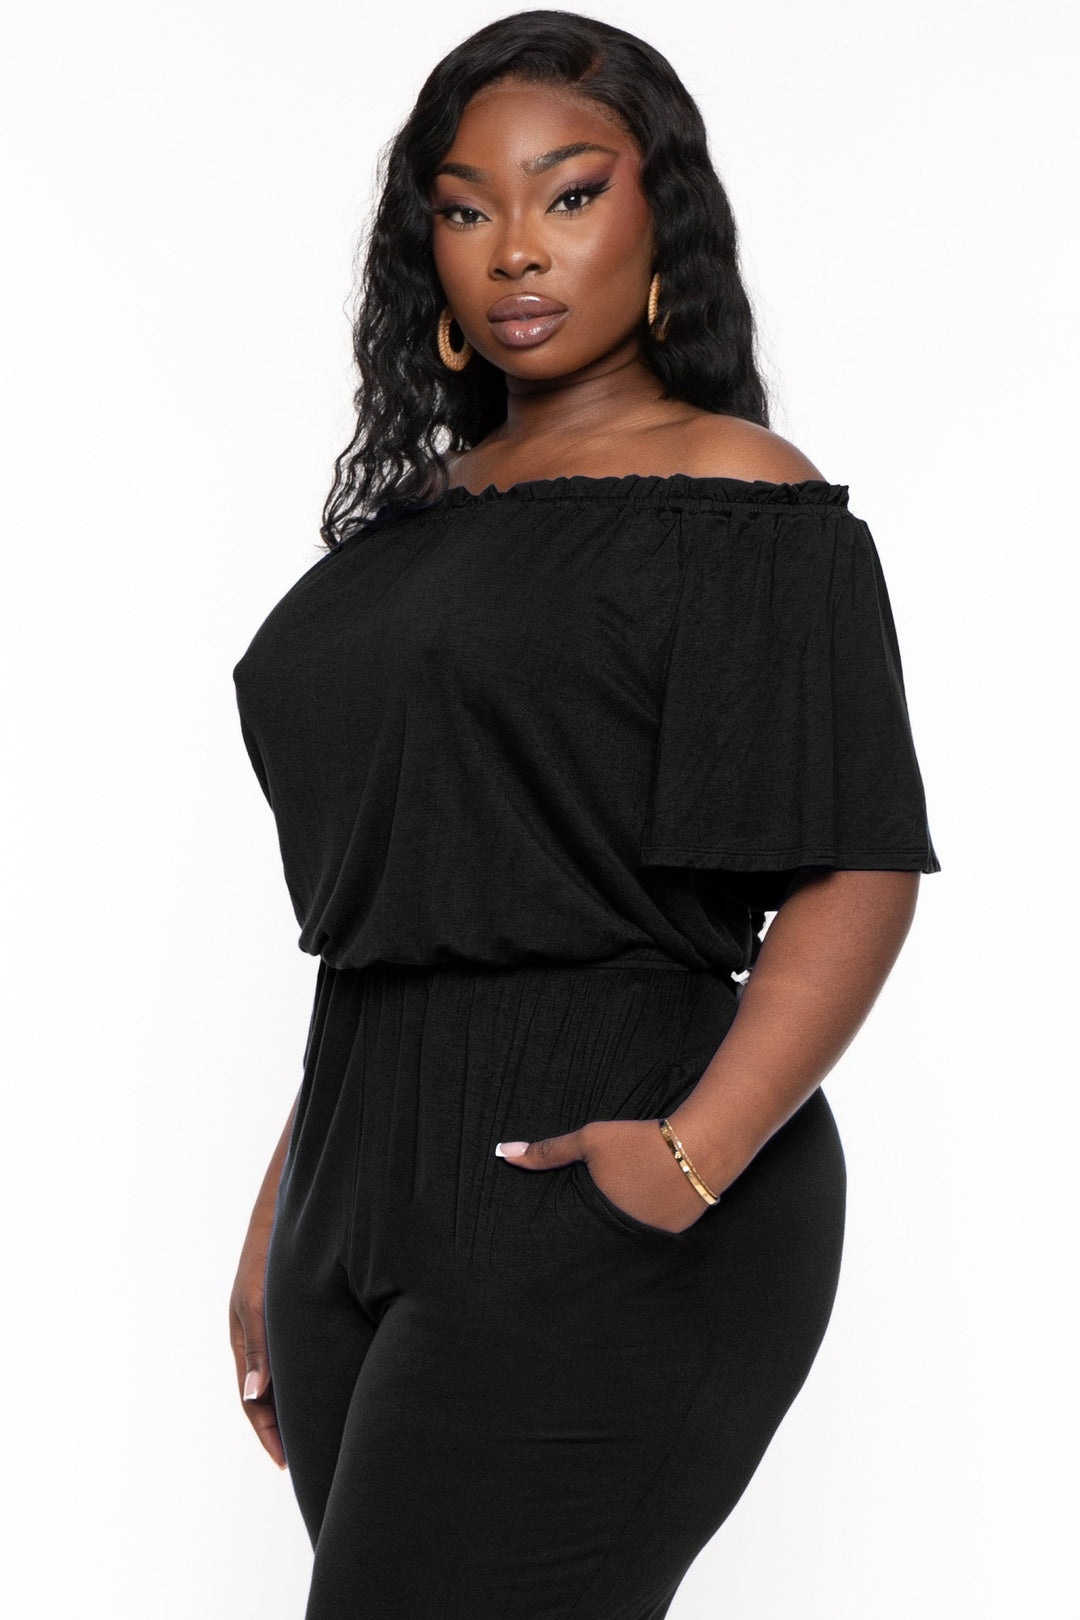 Pin on Plus Size Jumpsuits & Rompers